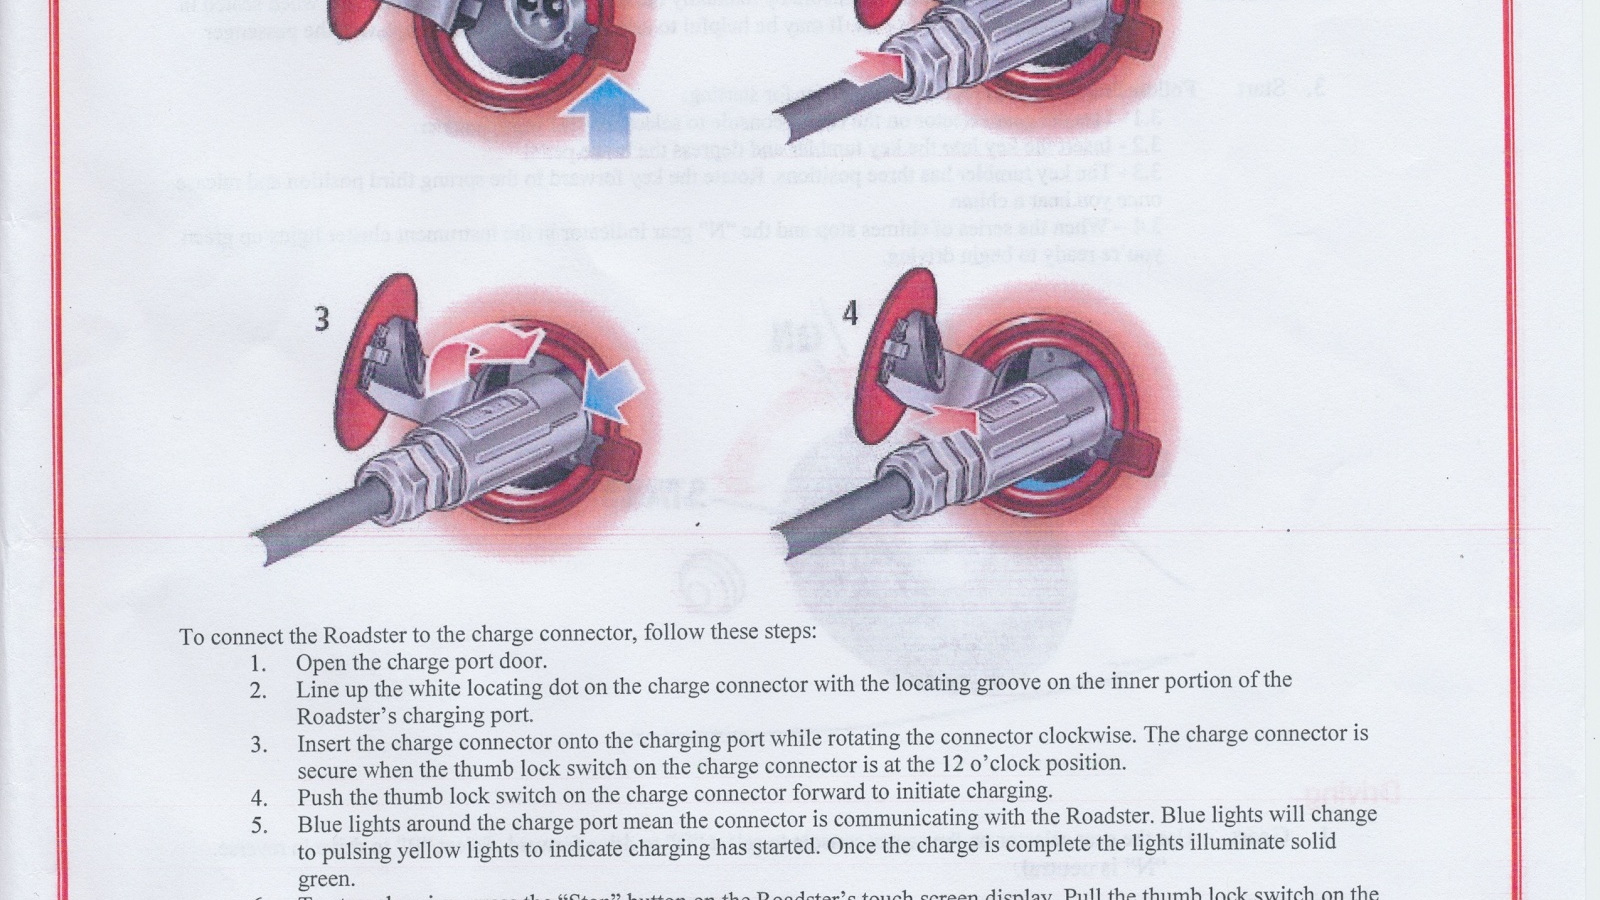 Tesla Roadster owner's documentation, including warnings & restrictions on battery state of charge